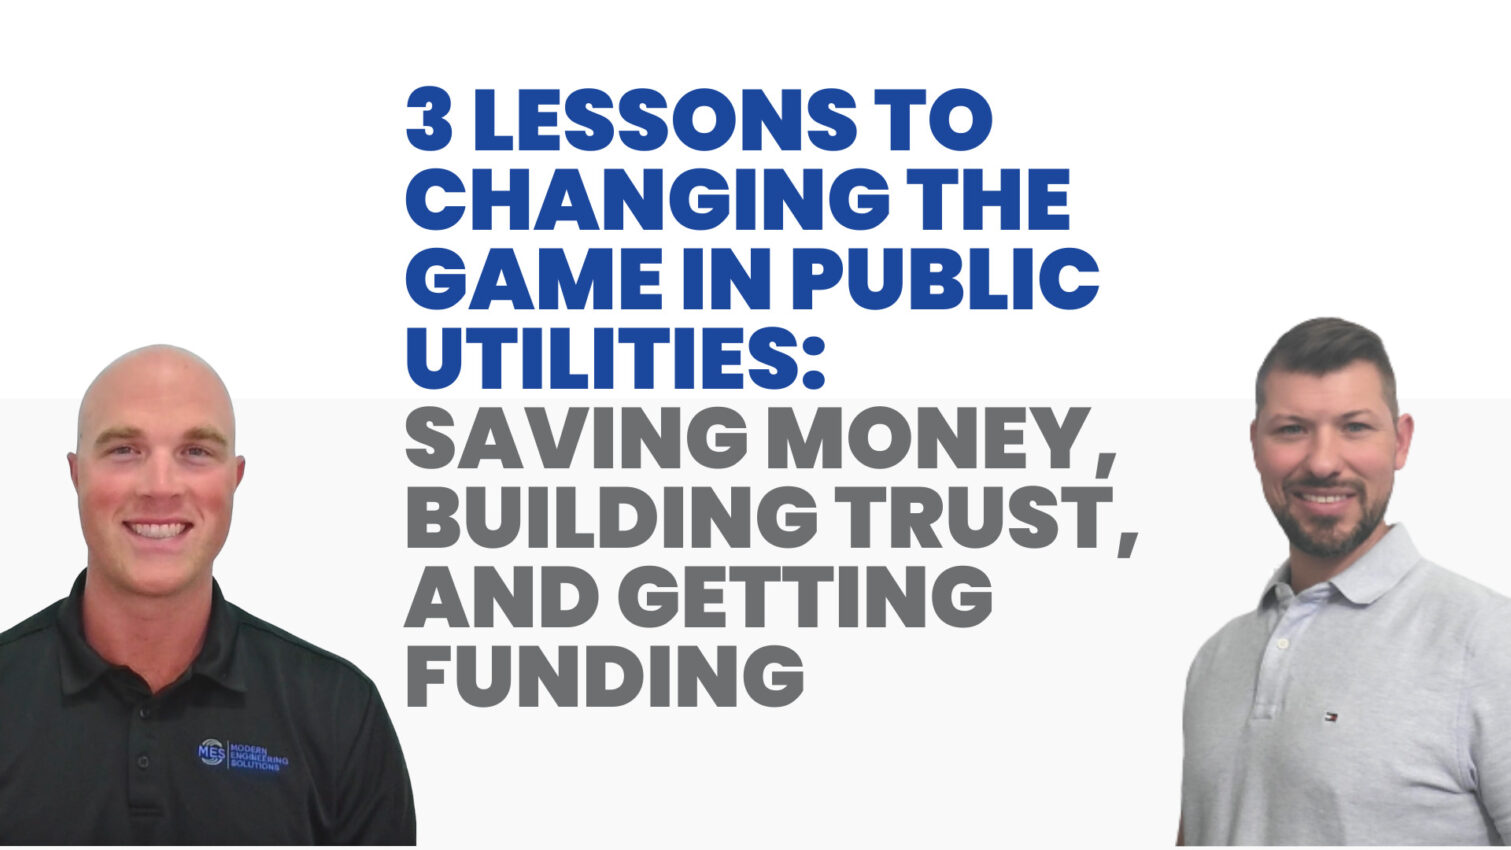 3 Lessons to Changing the Game in Public Utilities Saving Money, Building Trust, and Getting Funding